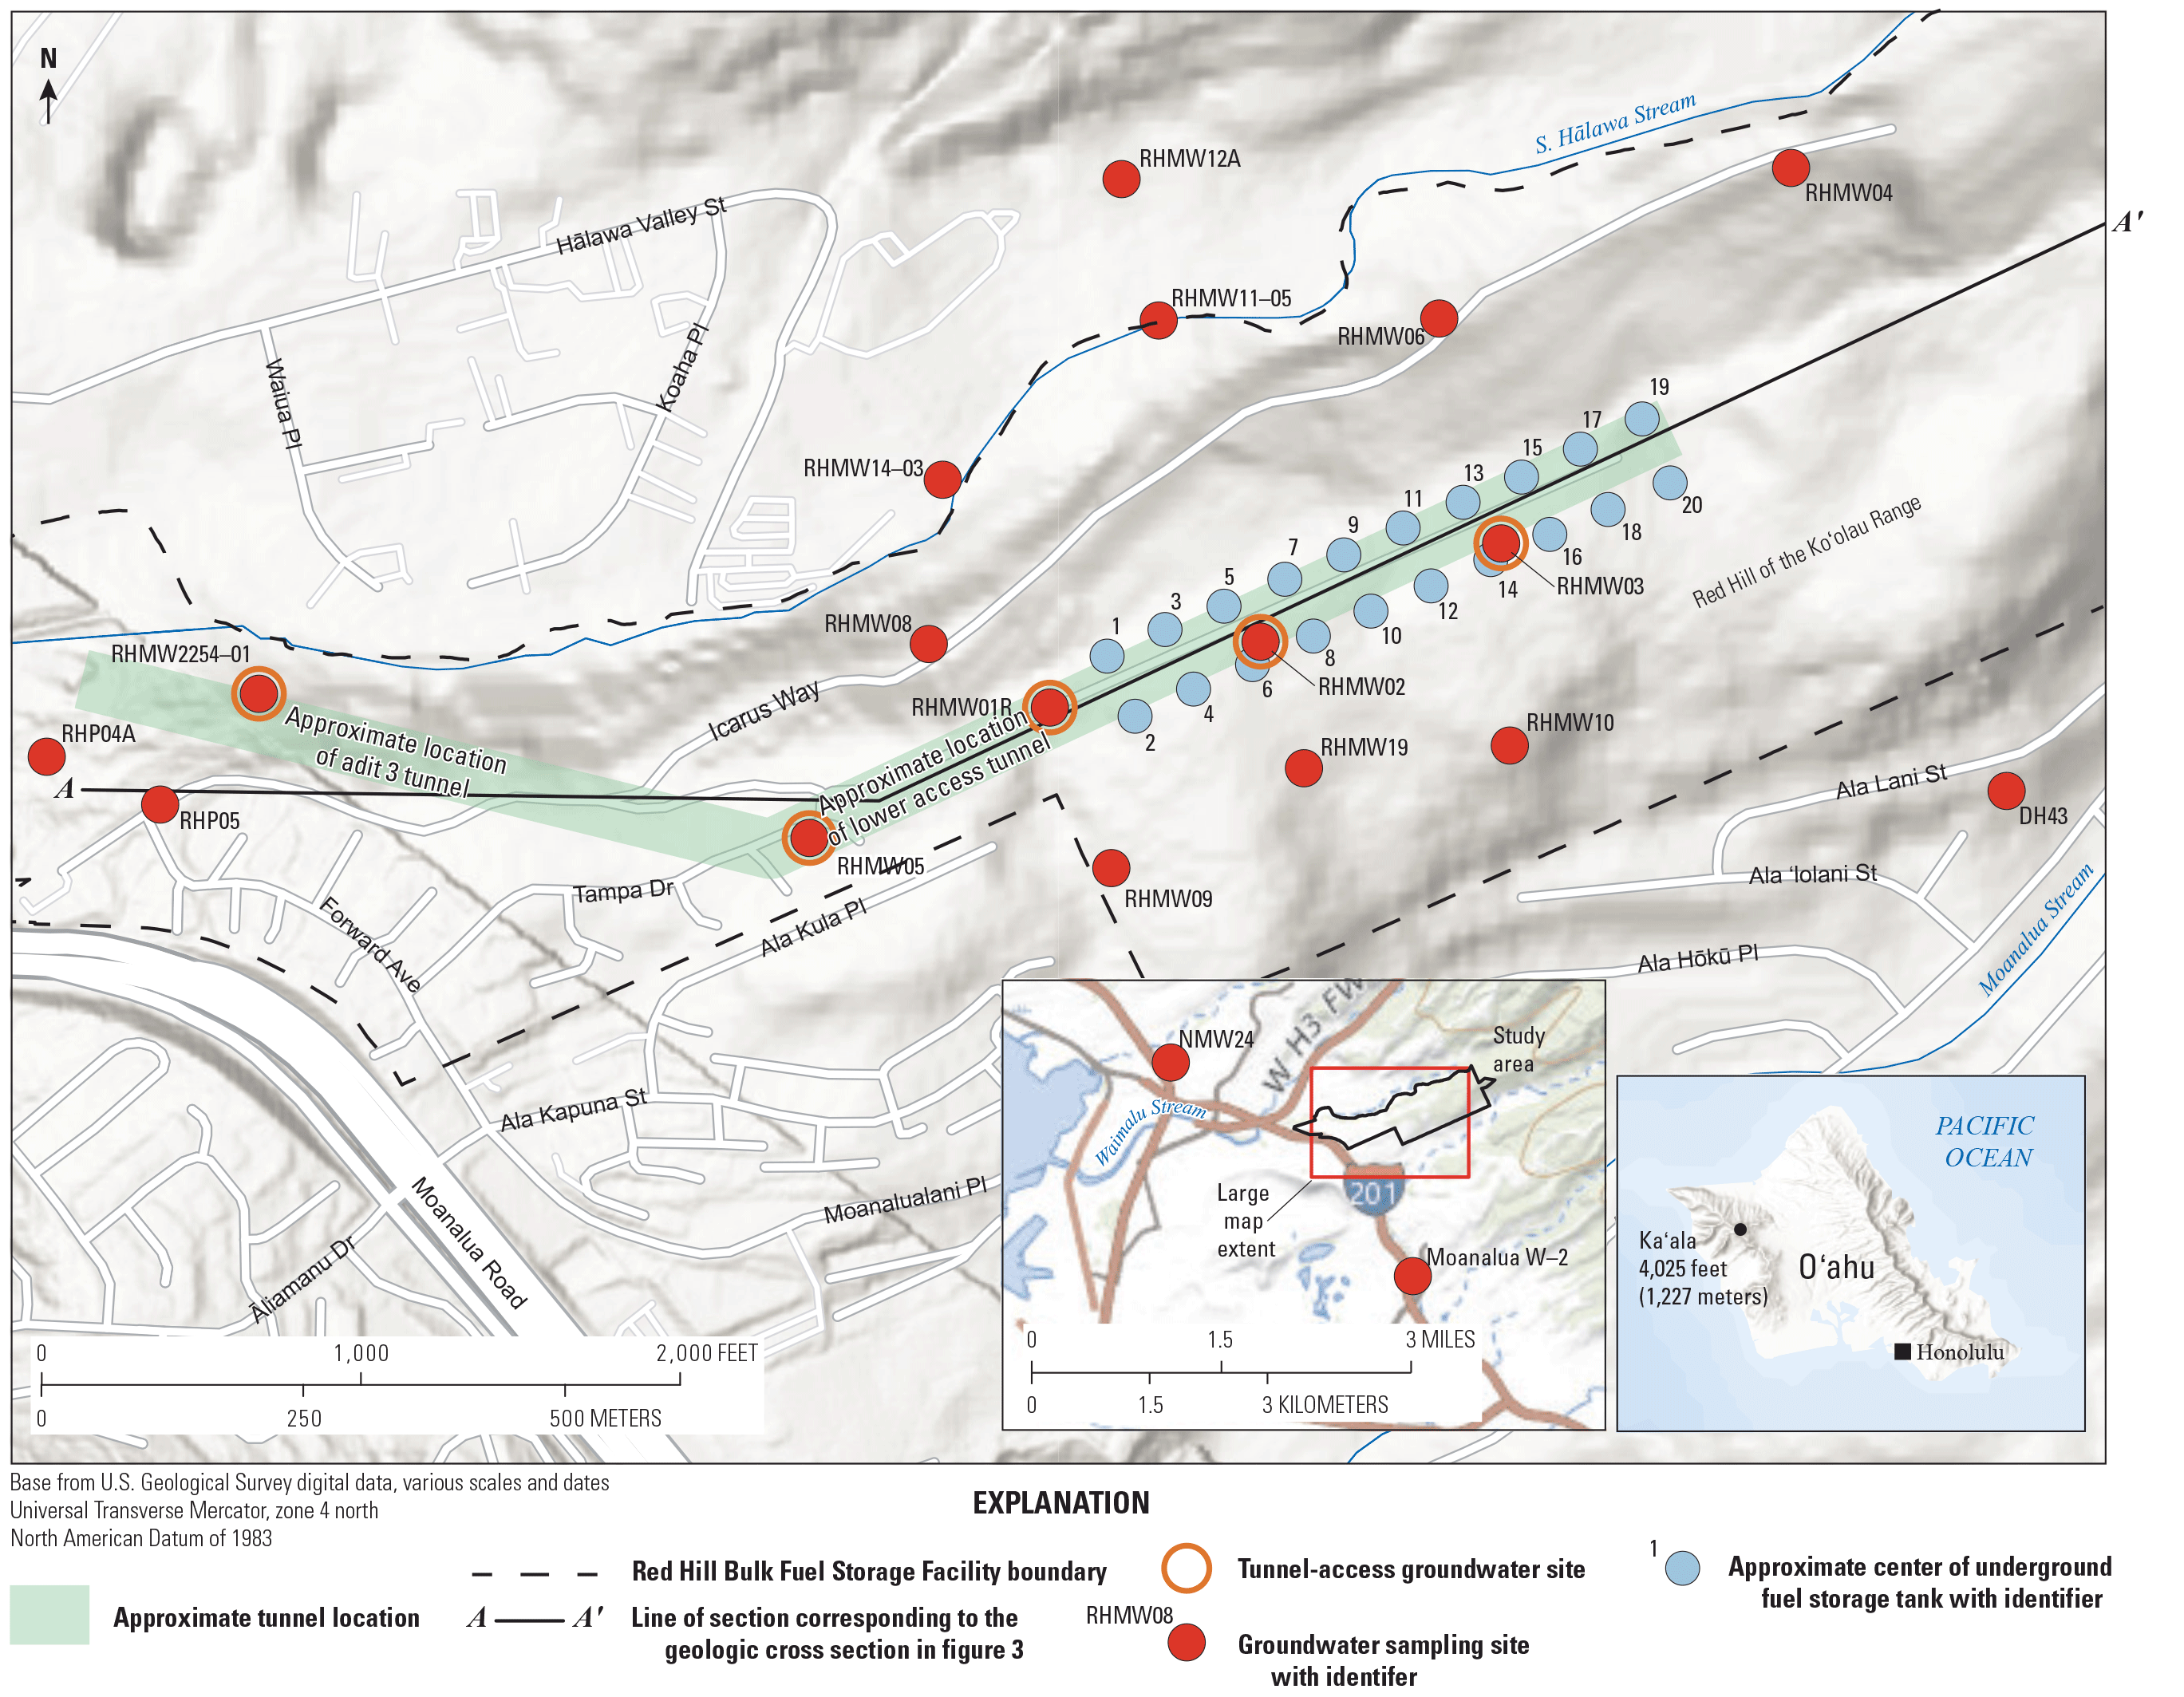 In O‘ahu, the boundary of the Red Hill Bulk Fuel Storage Facility and locations of
                     groundwater sampling sites, tunnel-access groundwater sites, and the approximate center
                     of underground fuel storage tanks are shown.